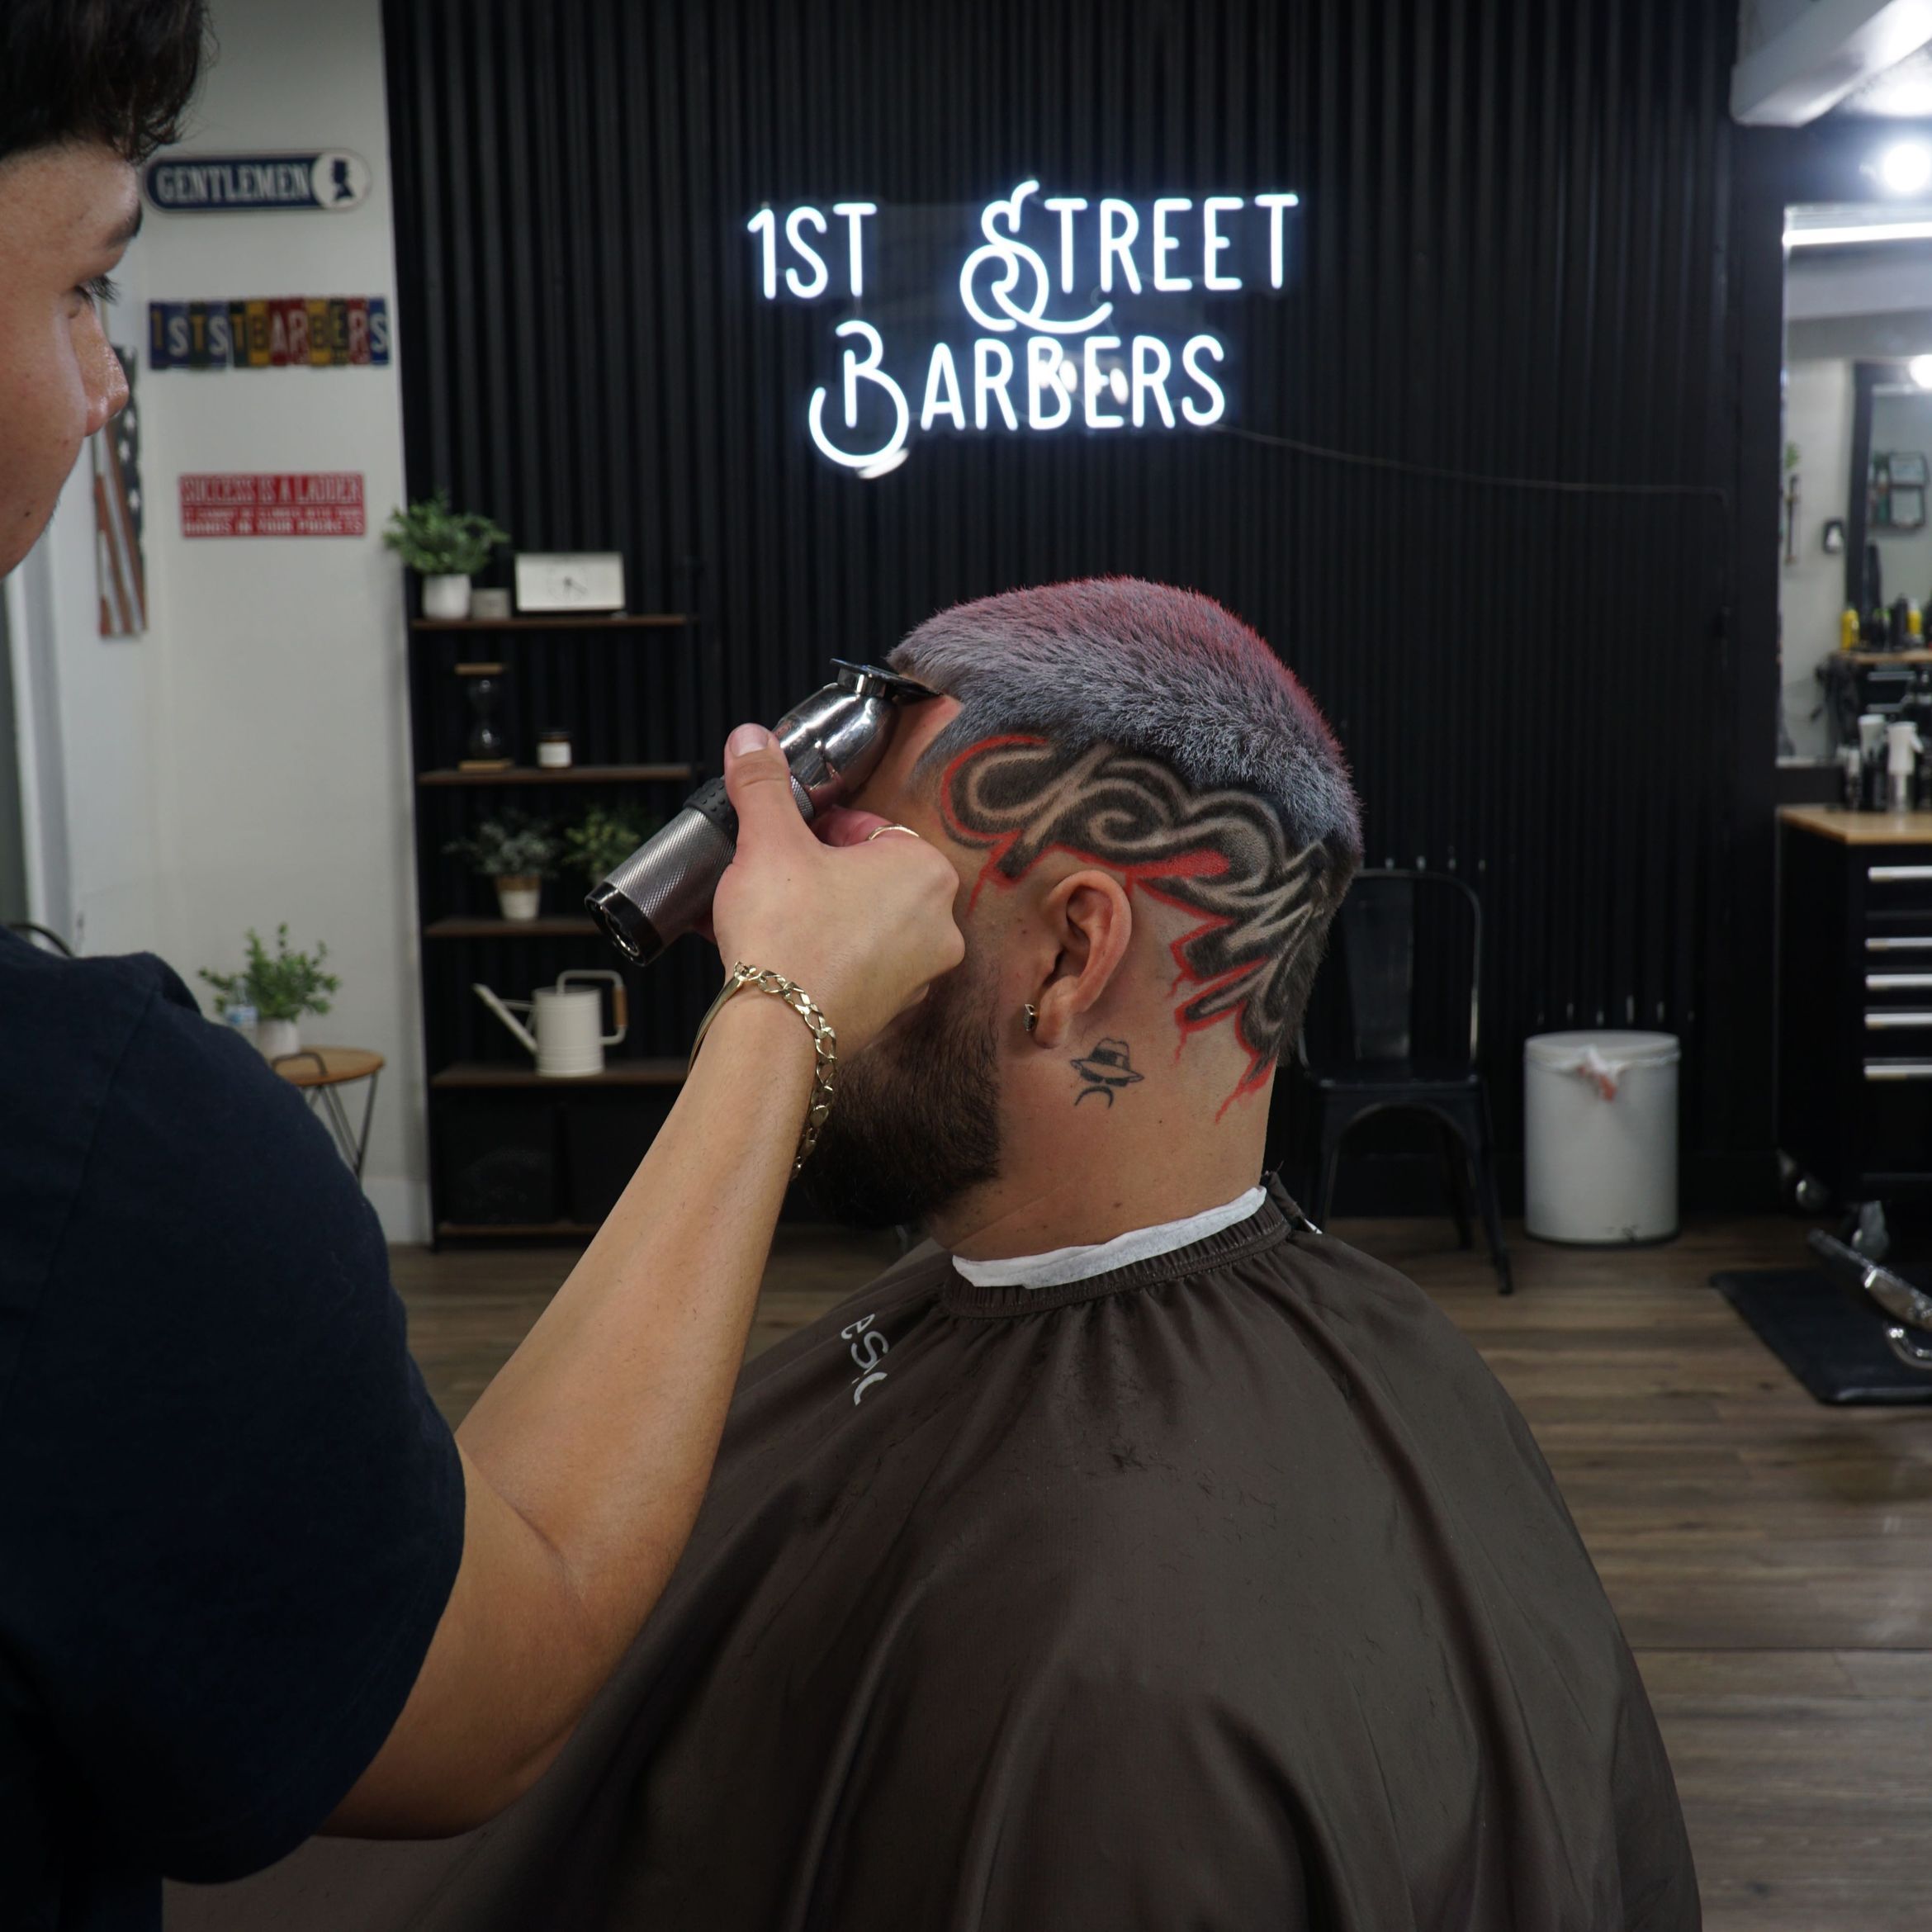 Pablo the barber - 1st Street Barbers